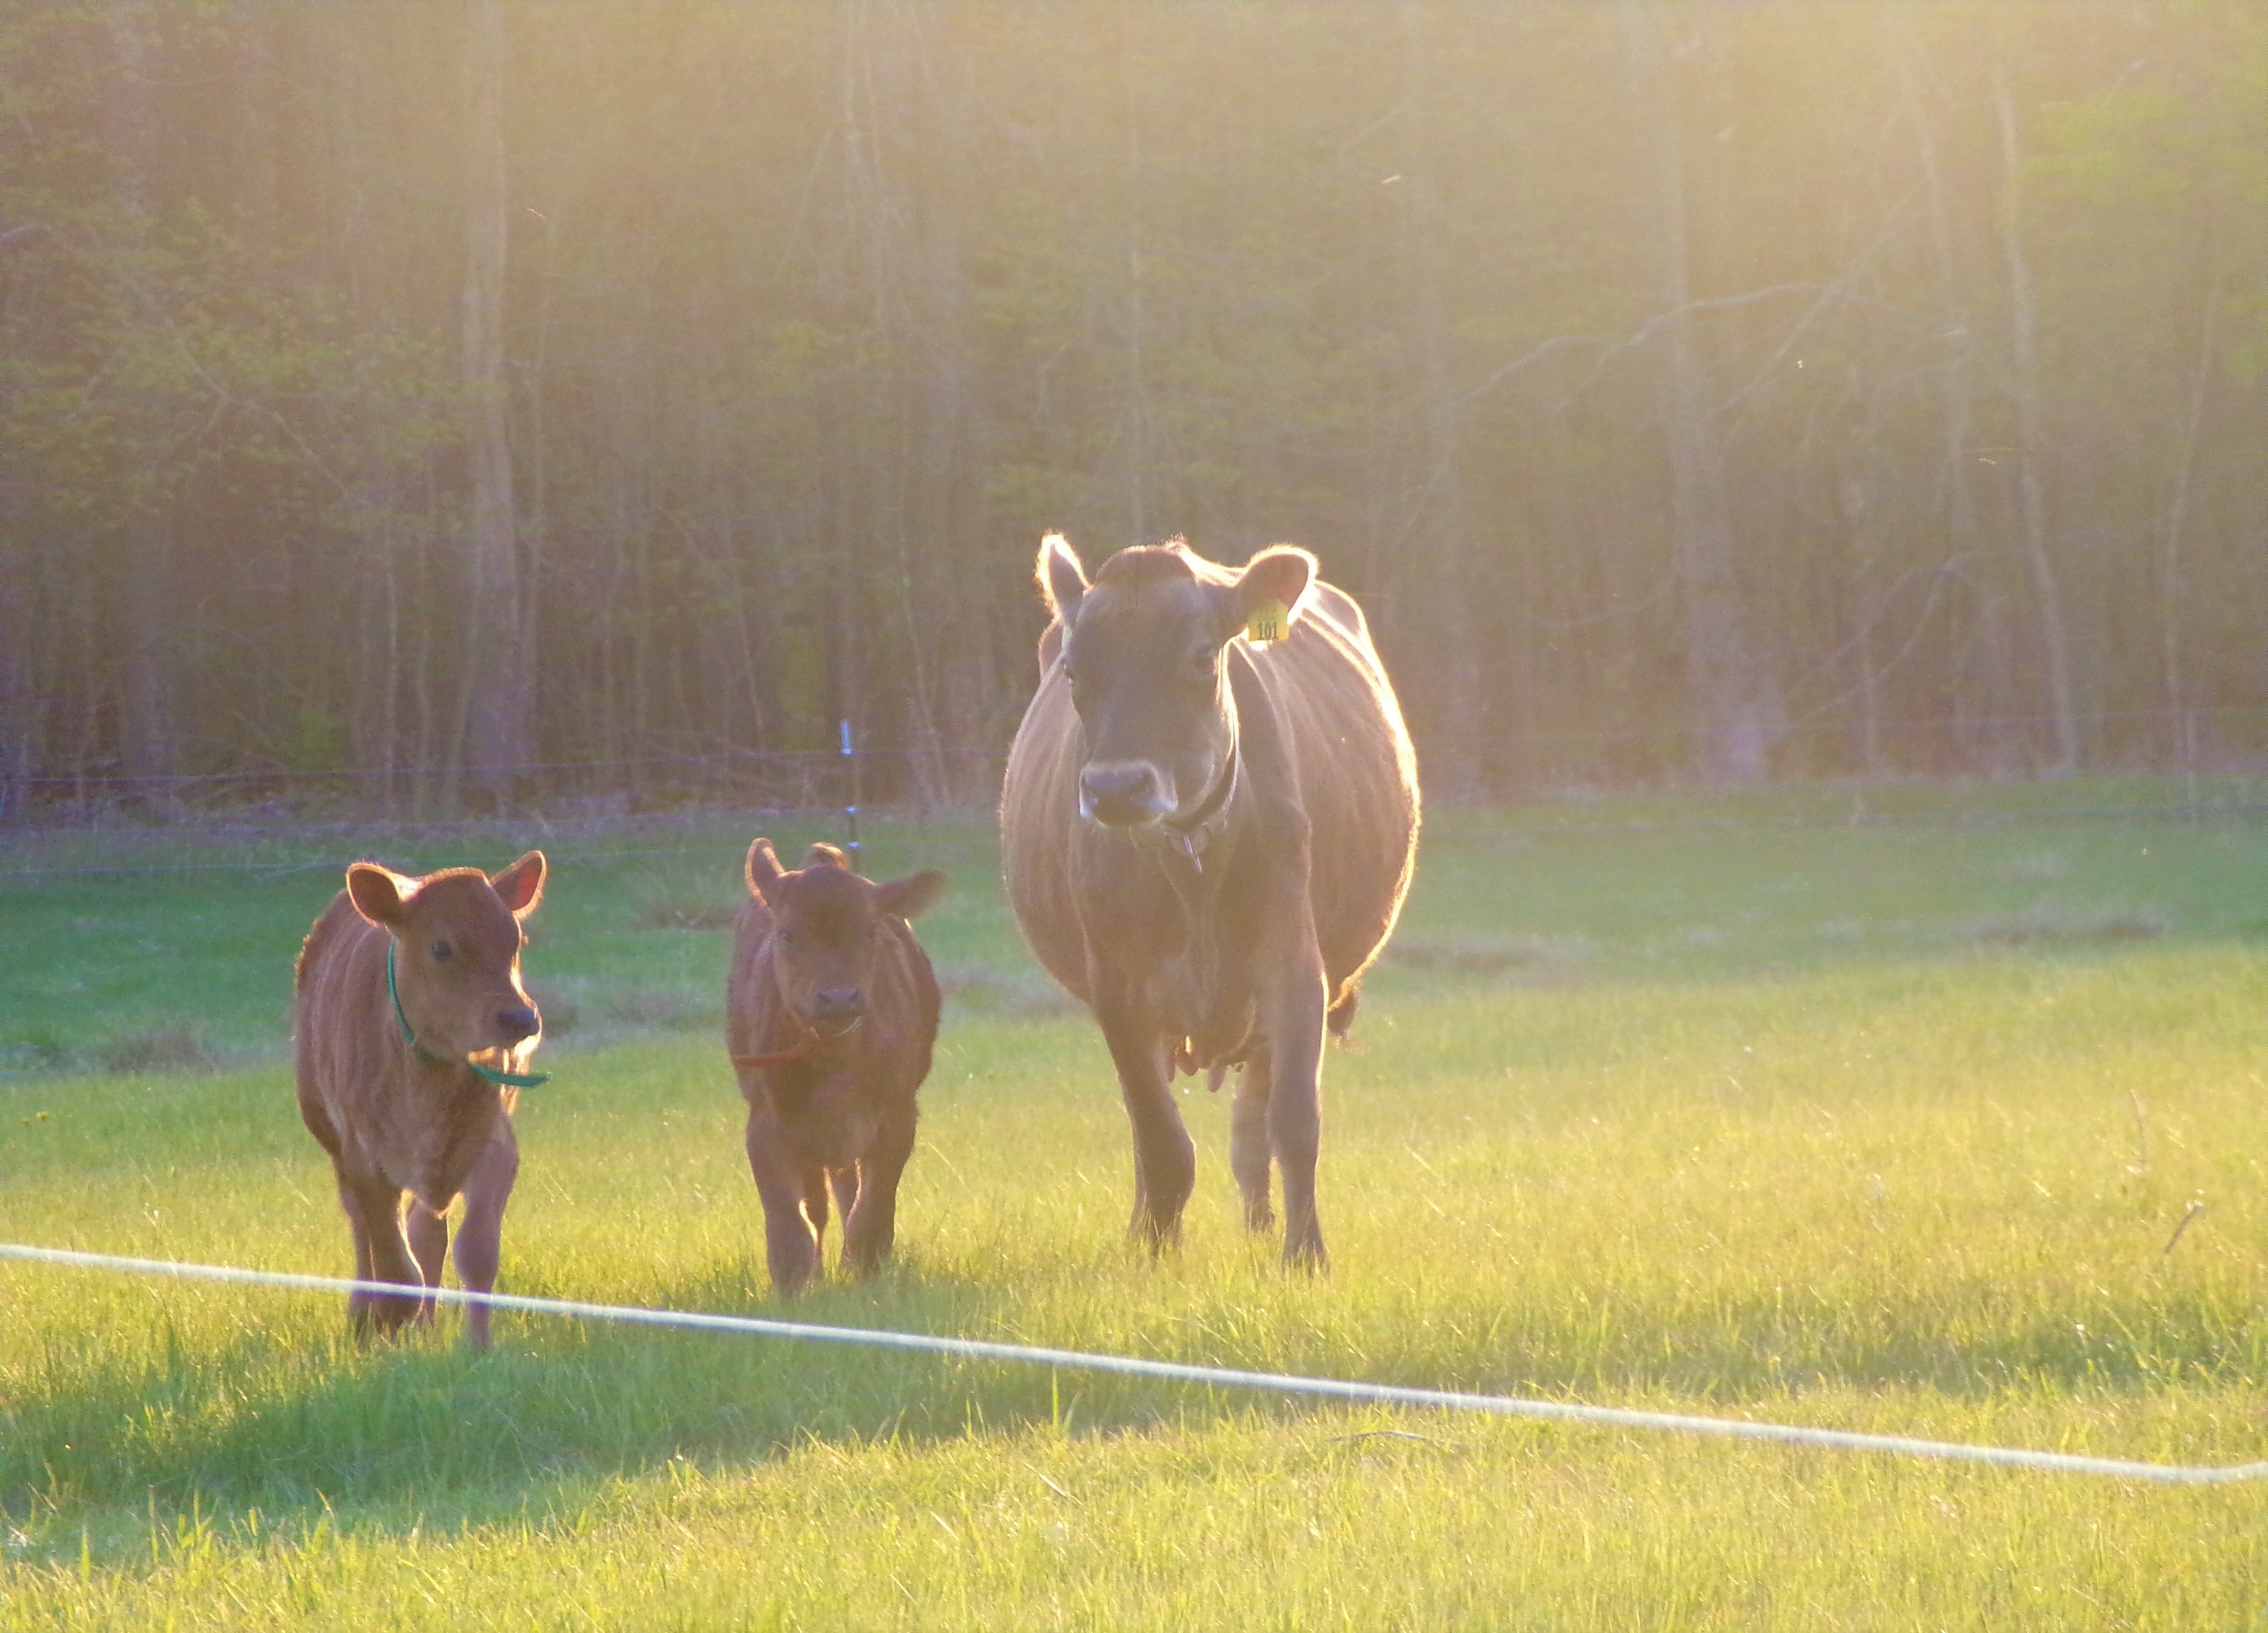 A Jersey family milk cow and her calf walk in a pasture